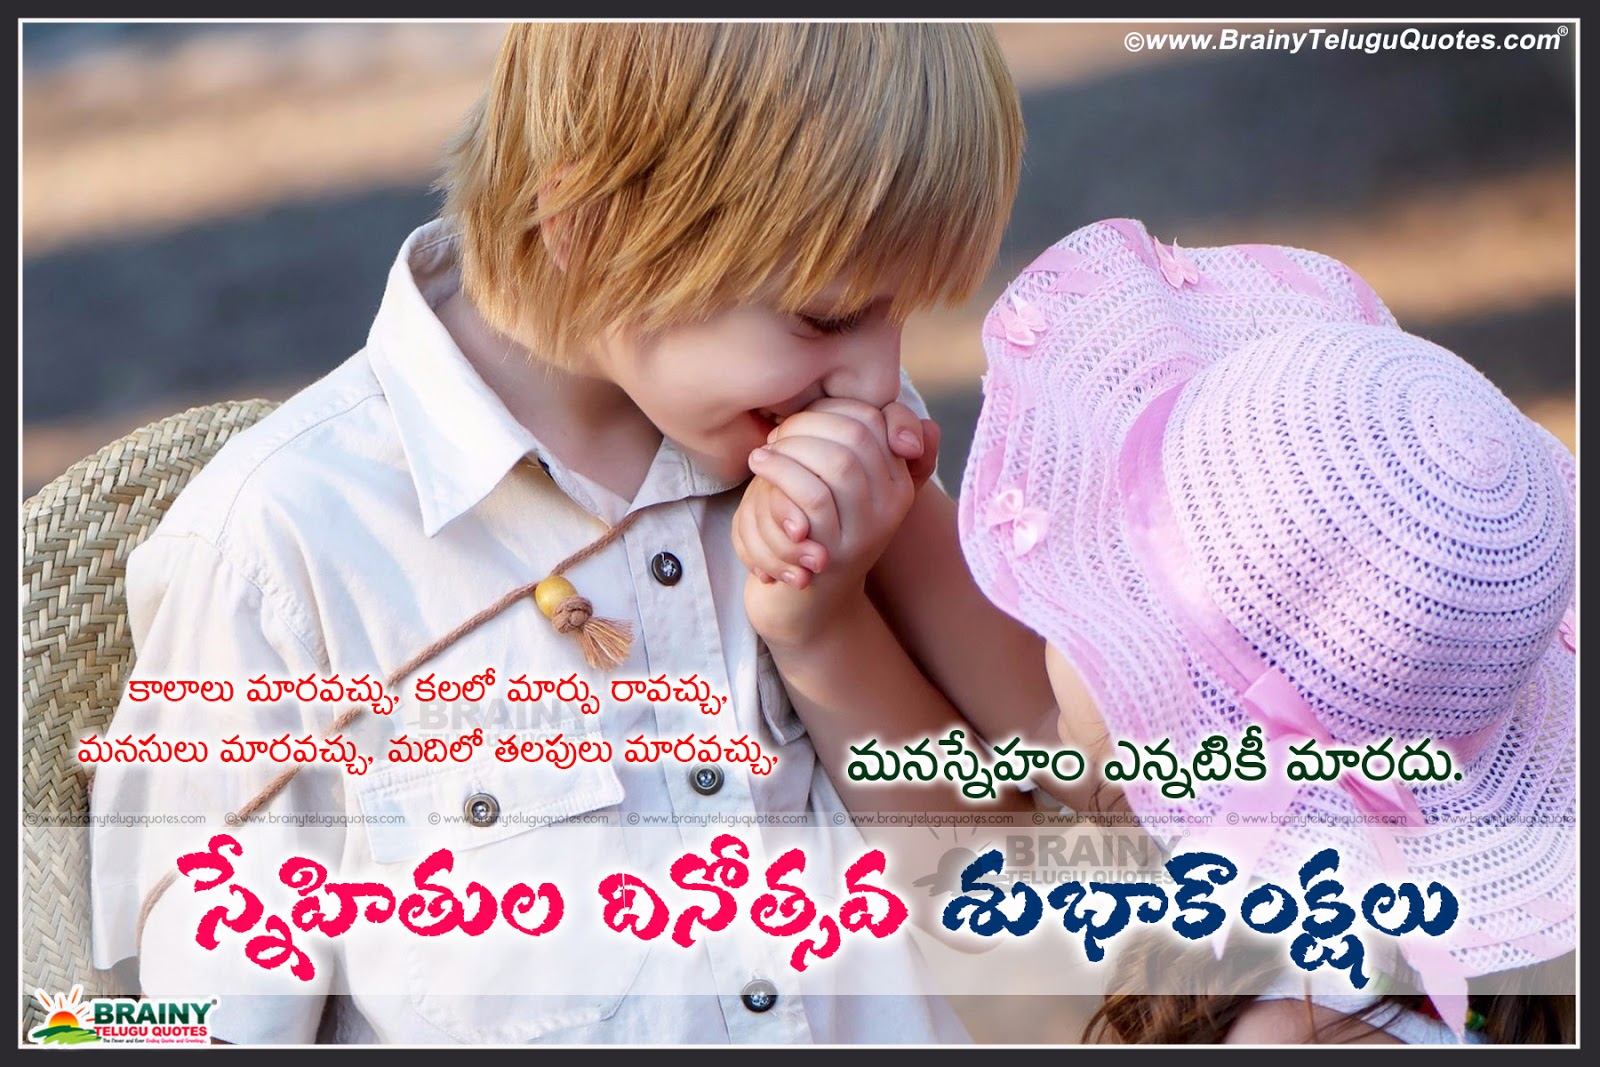 friendship day wallpapers,text,nose,photo caption,forehead,cheek